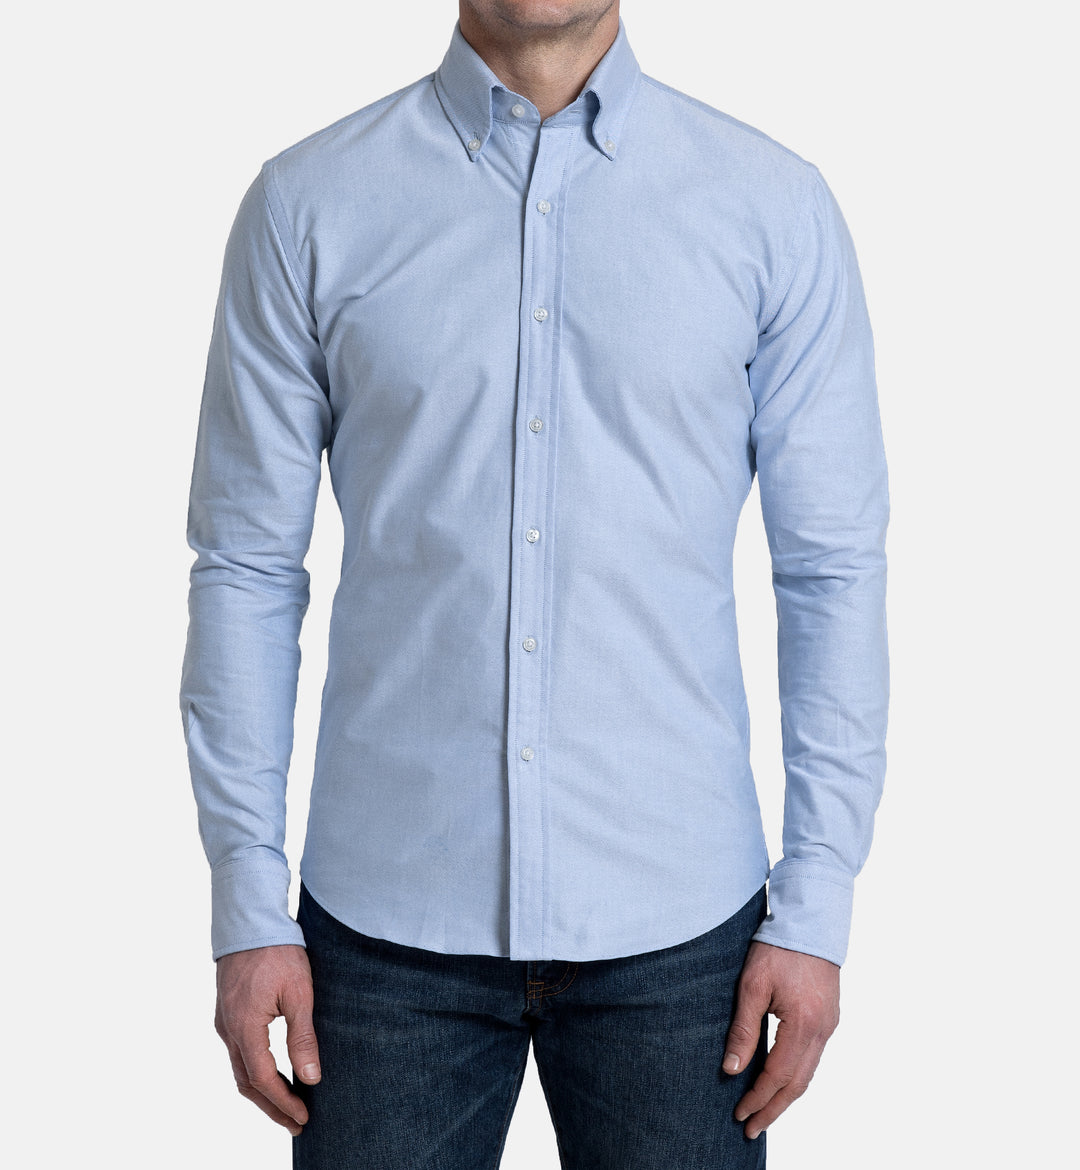 Shirts For Men's | All For Me Today